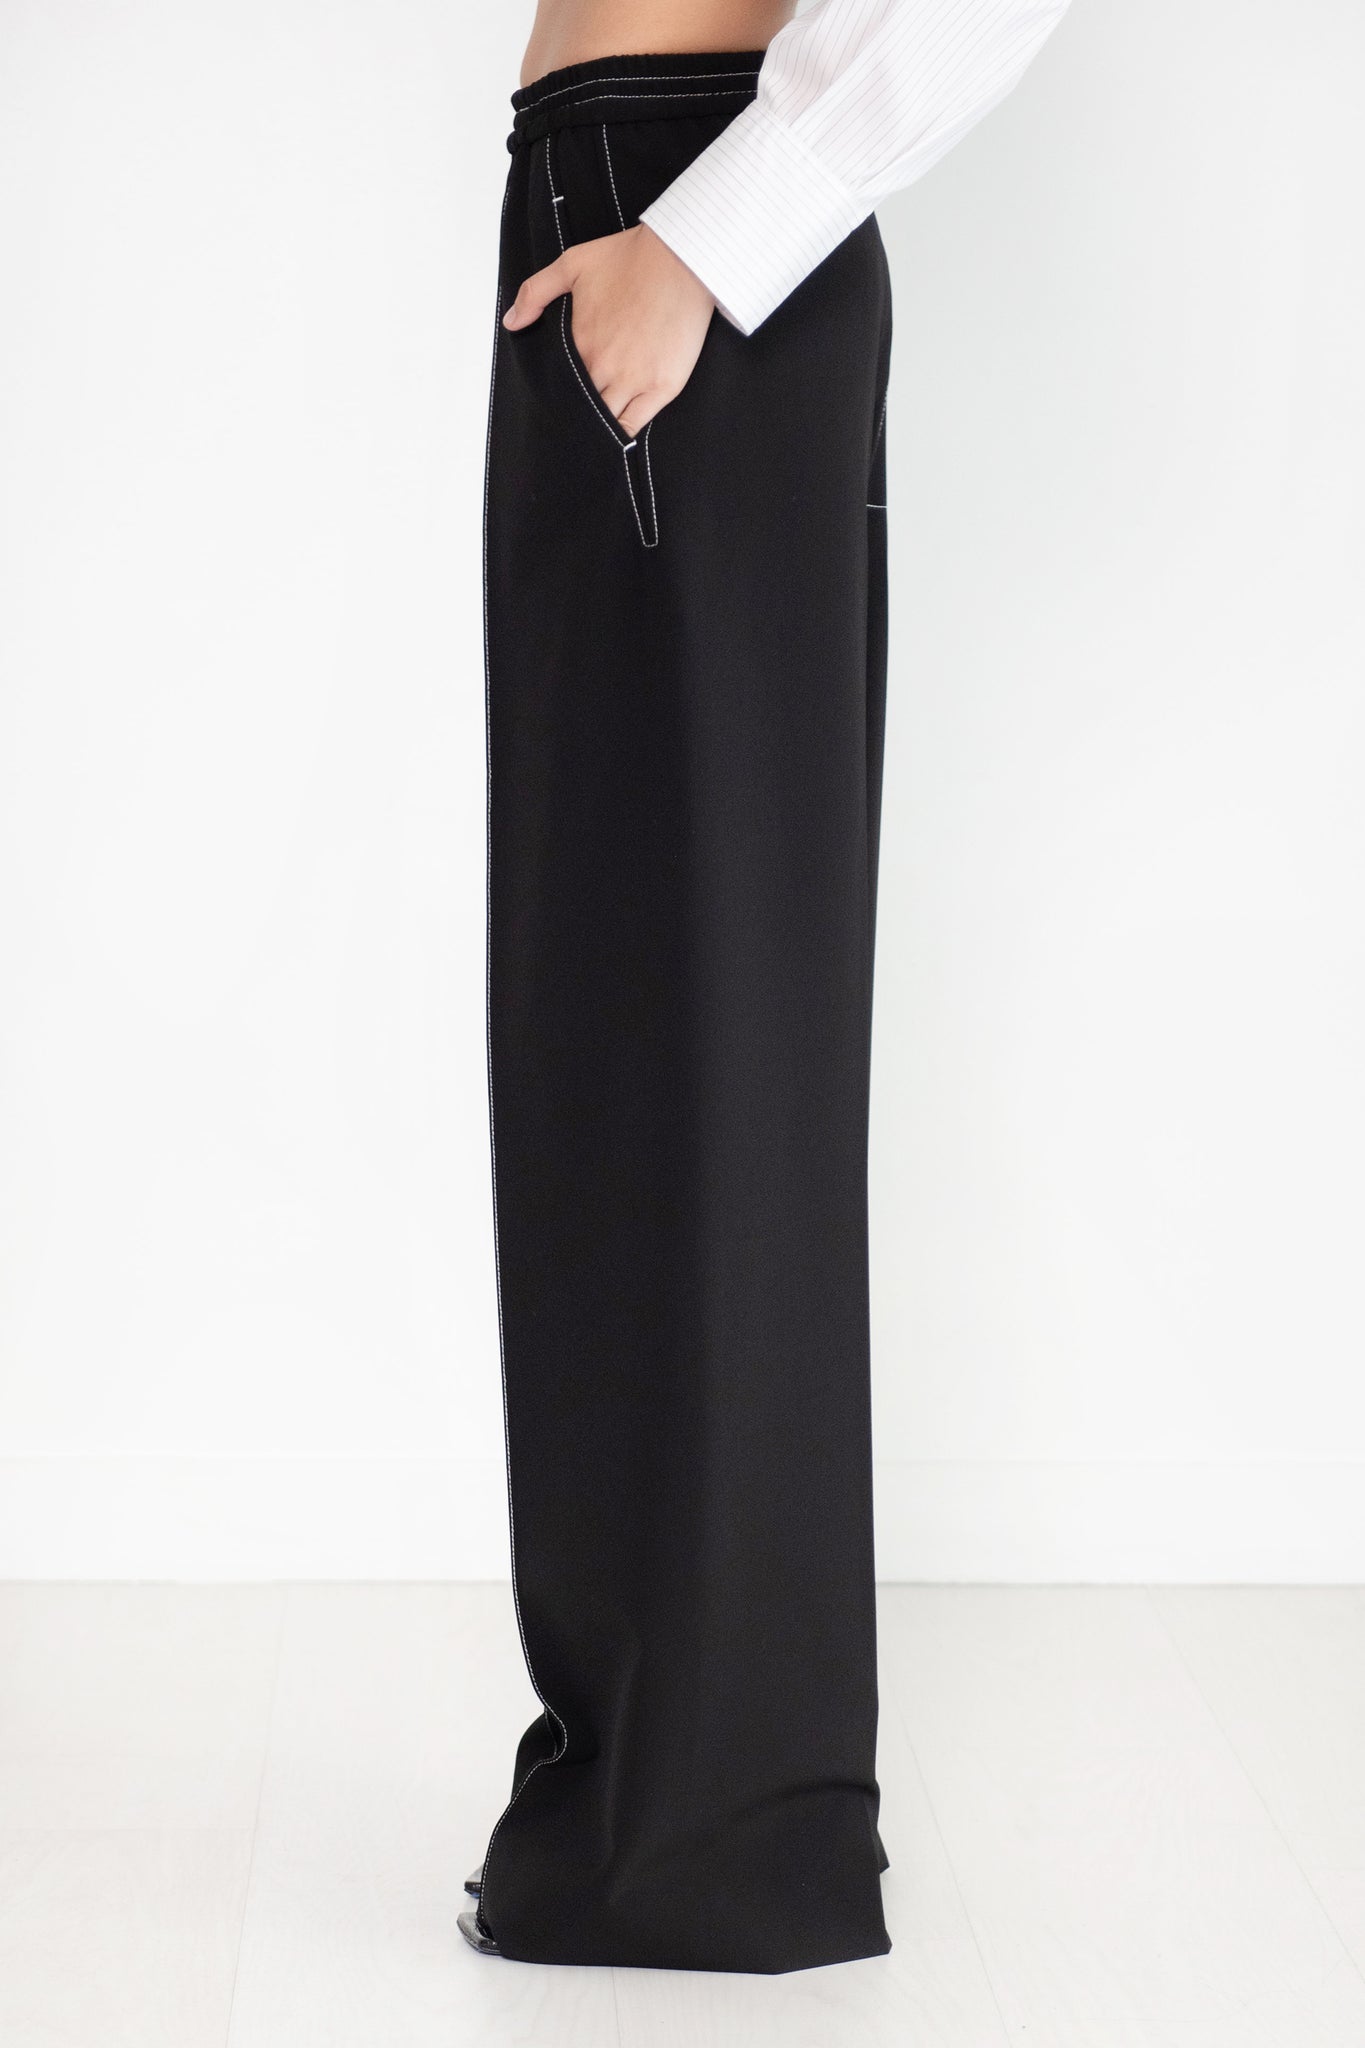 ROSETTA GETTY - Relaxed Pull On Pant, Black